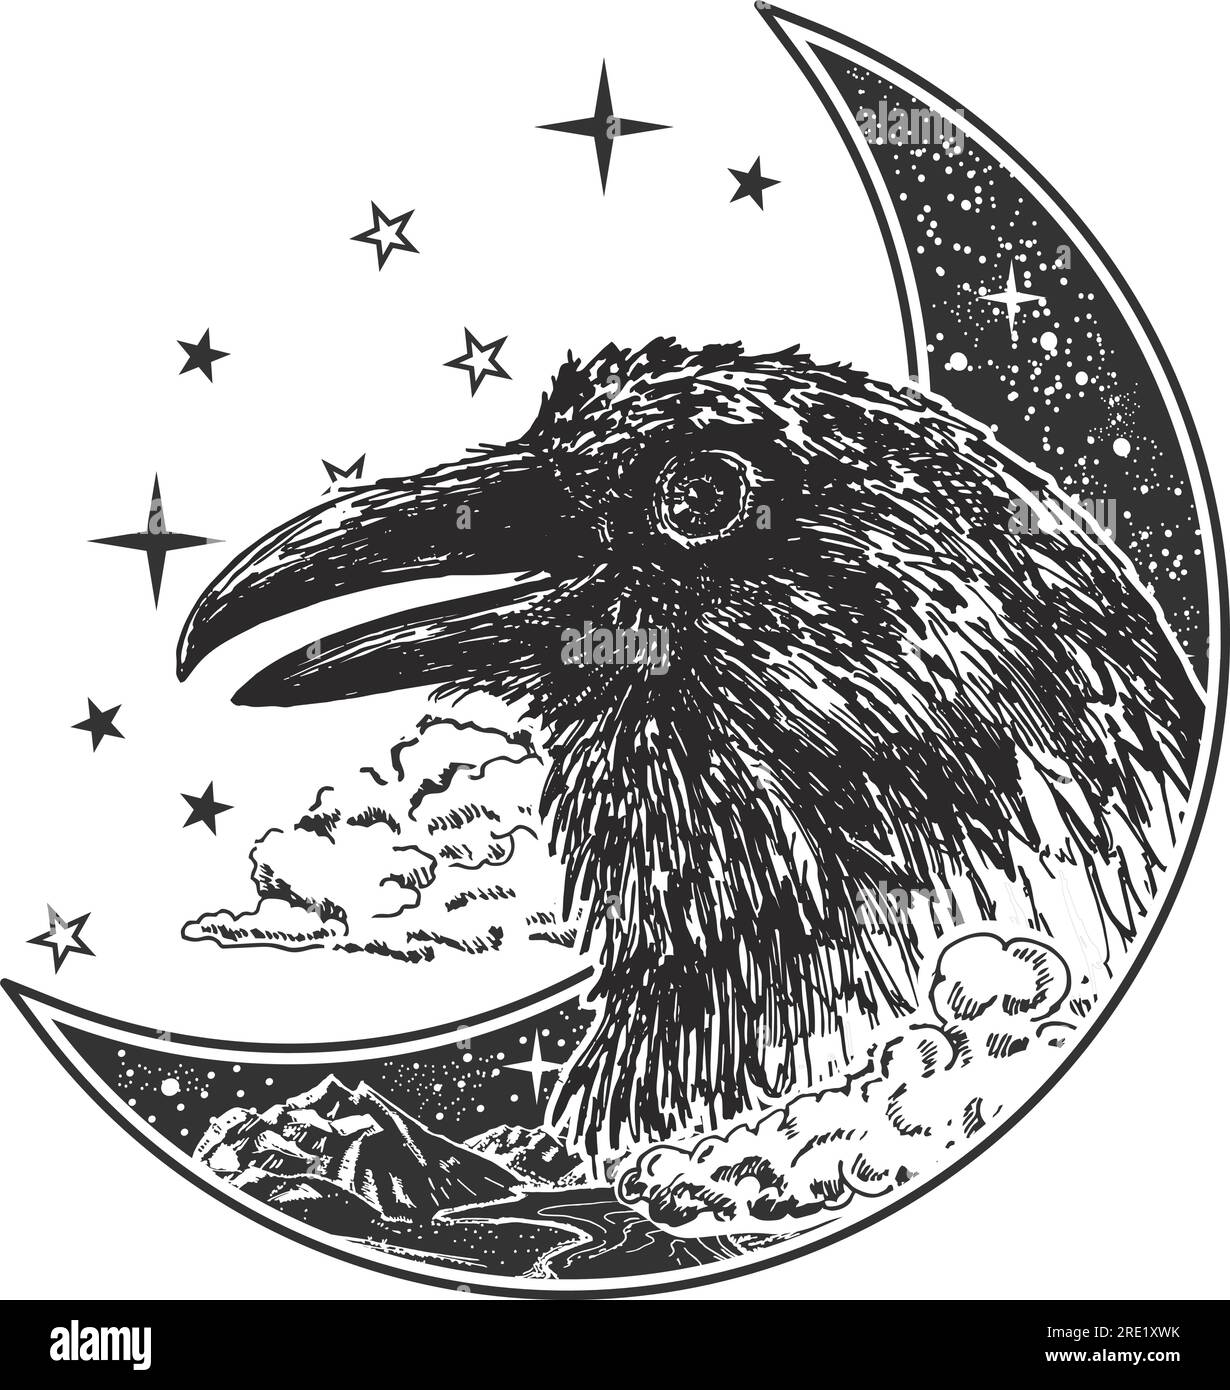 Head of raven over crescent moon engraving boho style vector illustration Stock Vector